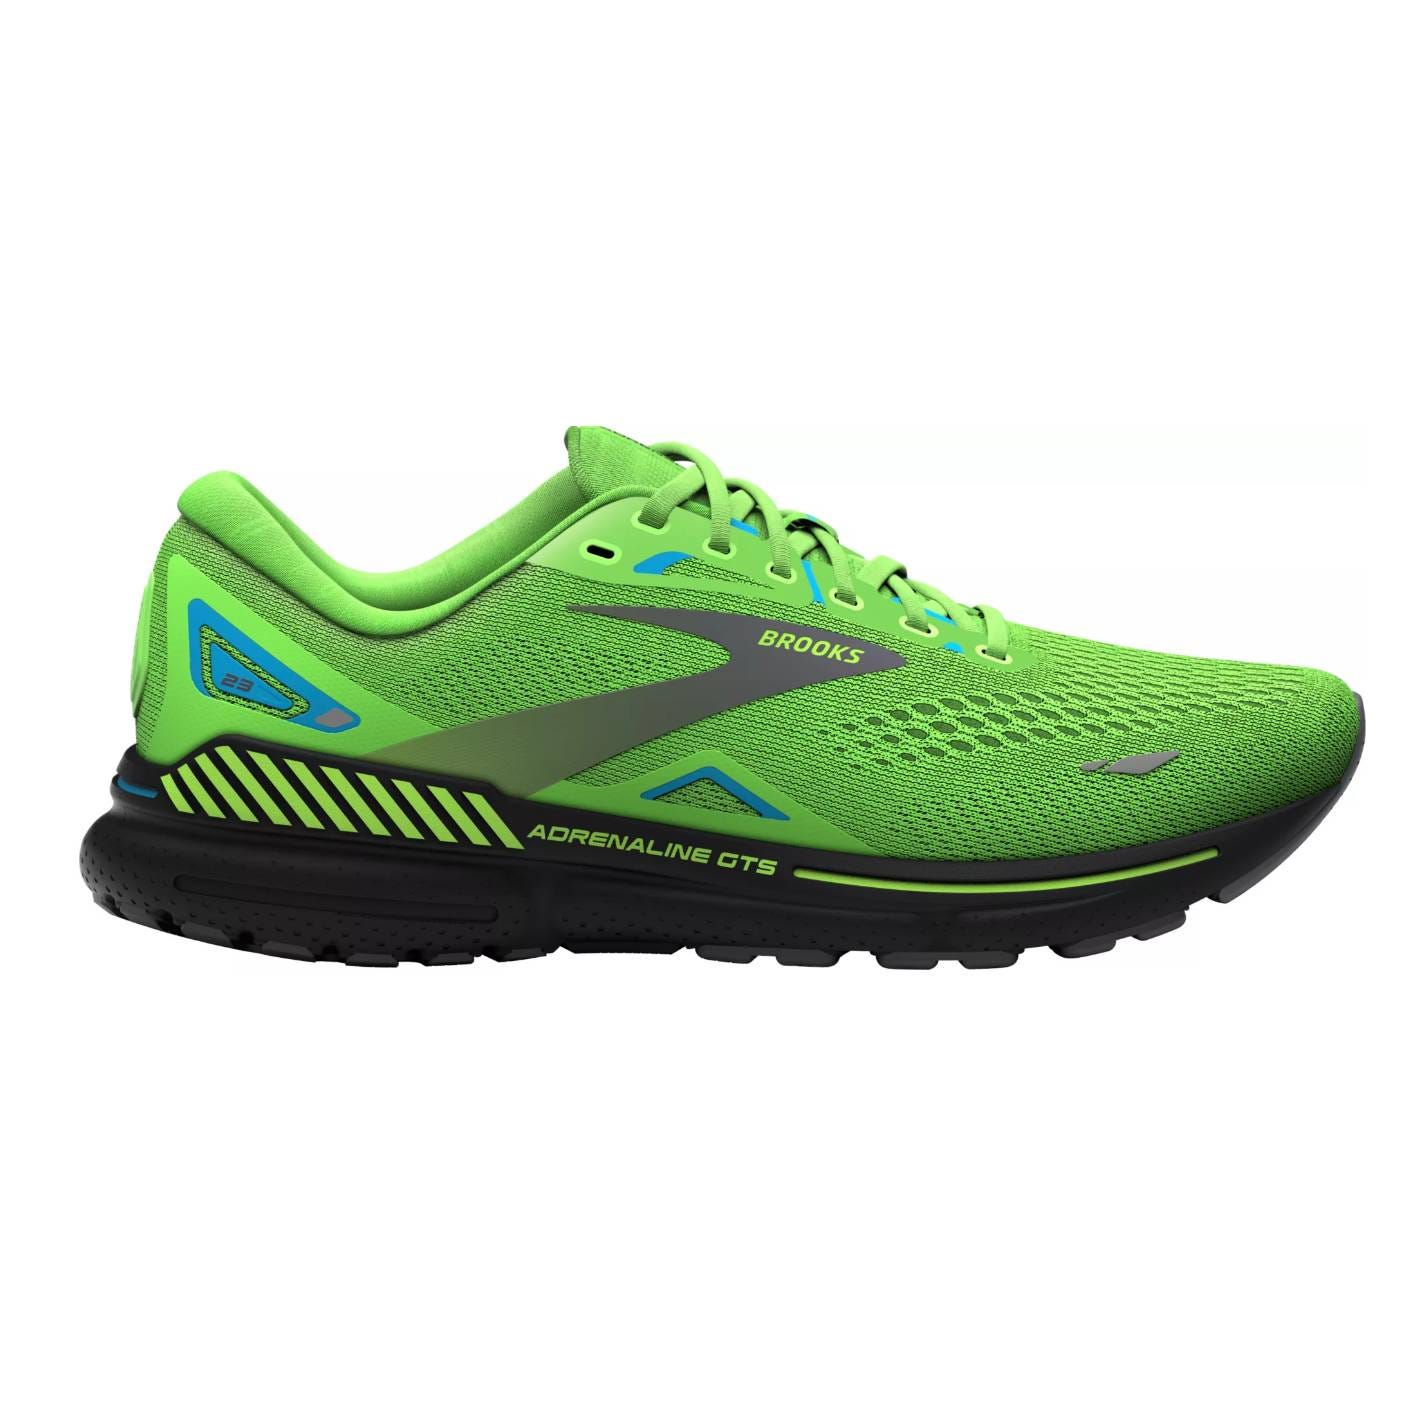 Lime green Brooks running shoe with black details and cushioned sole.